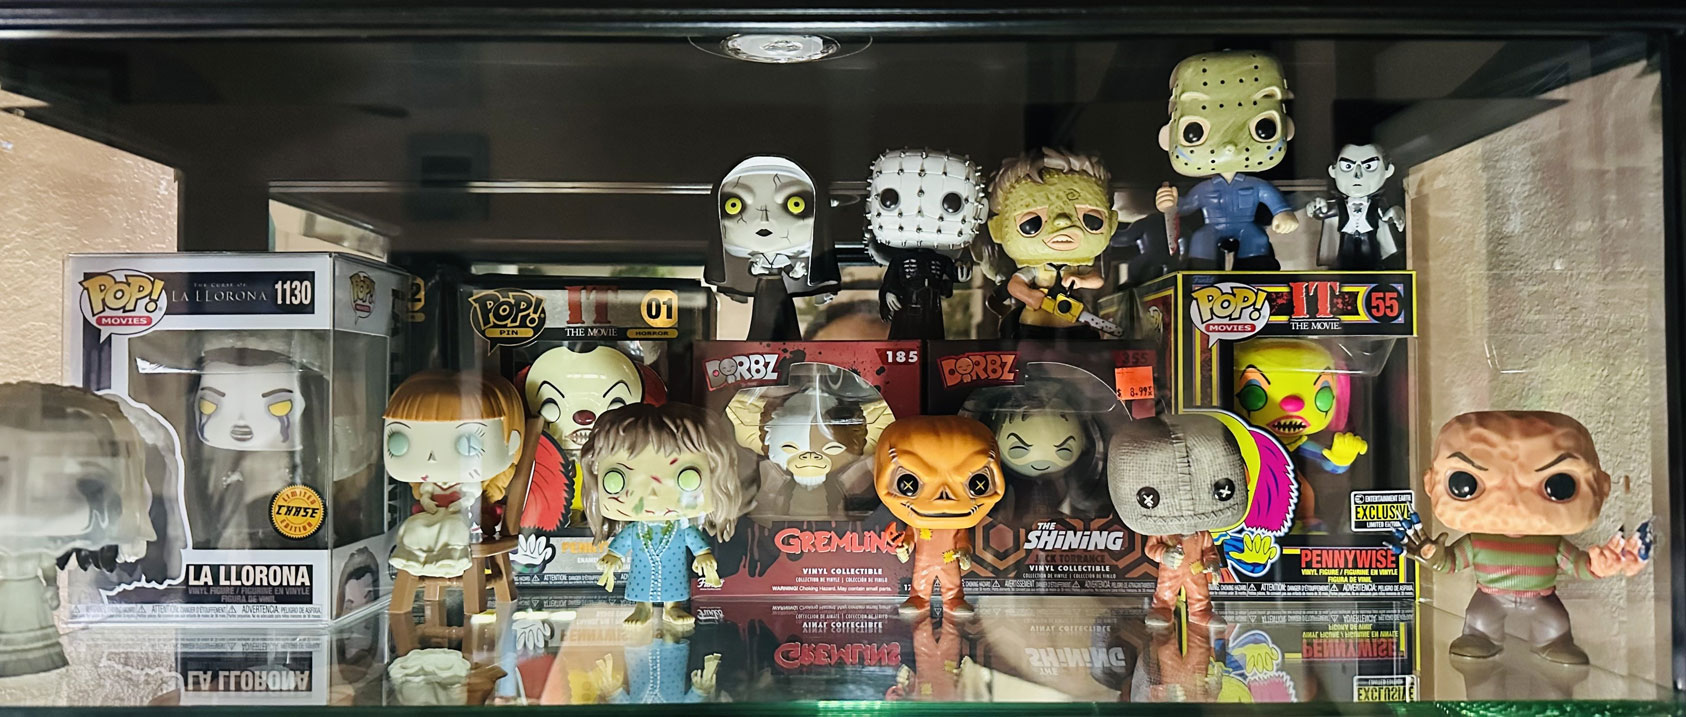 Manuel's horror collection